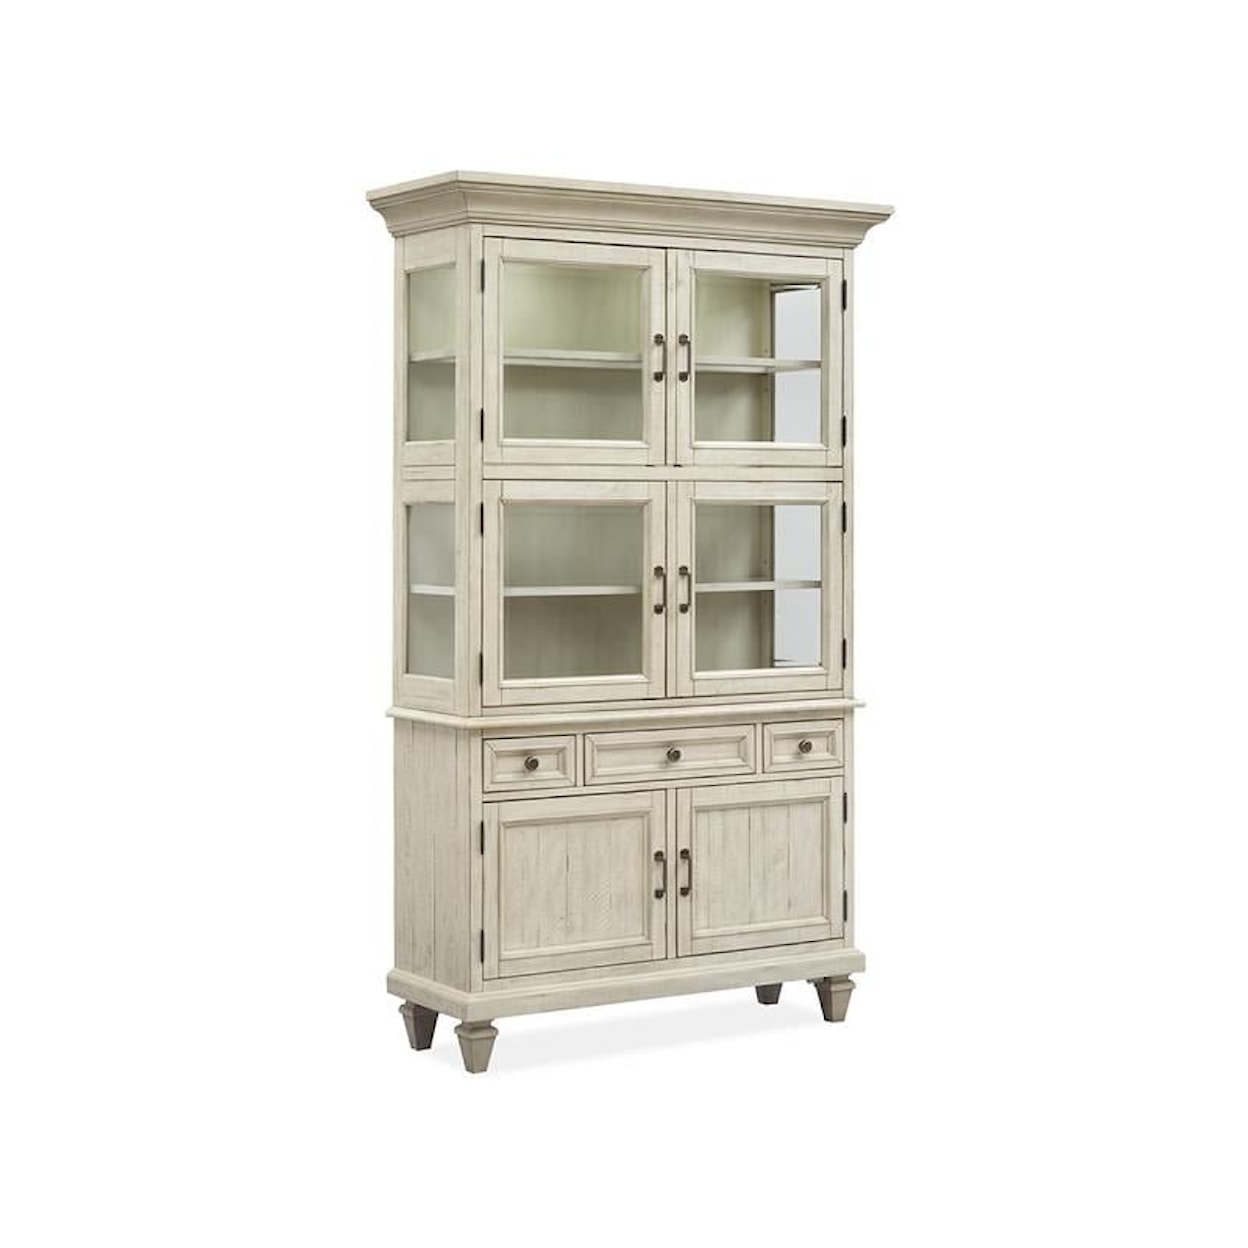 Magnussen Home Newport Dining Dining Cabinet
